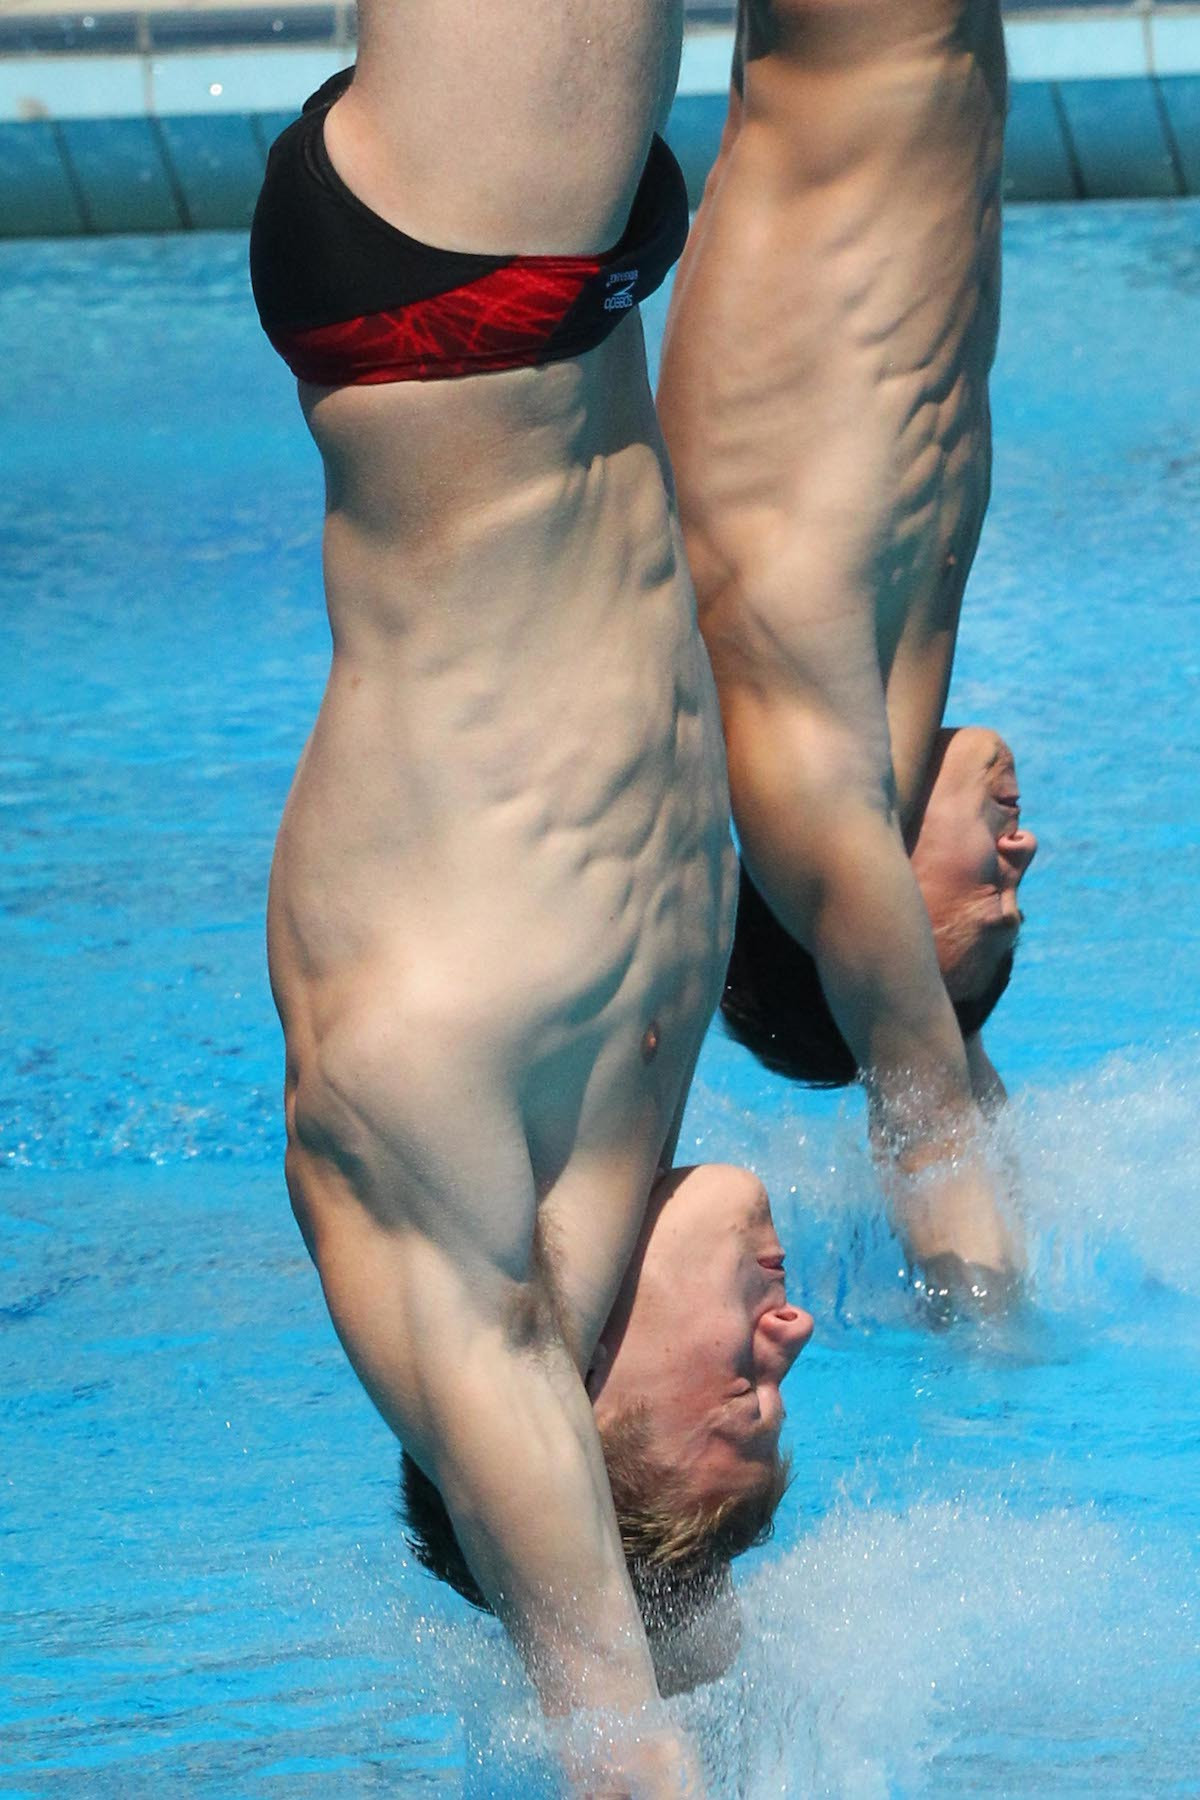 Canada won bronze in the men's 10m synchronised platform competition ©FISU